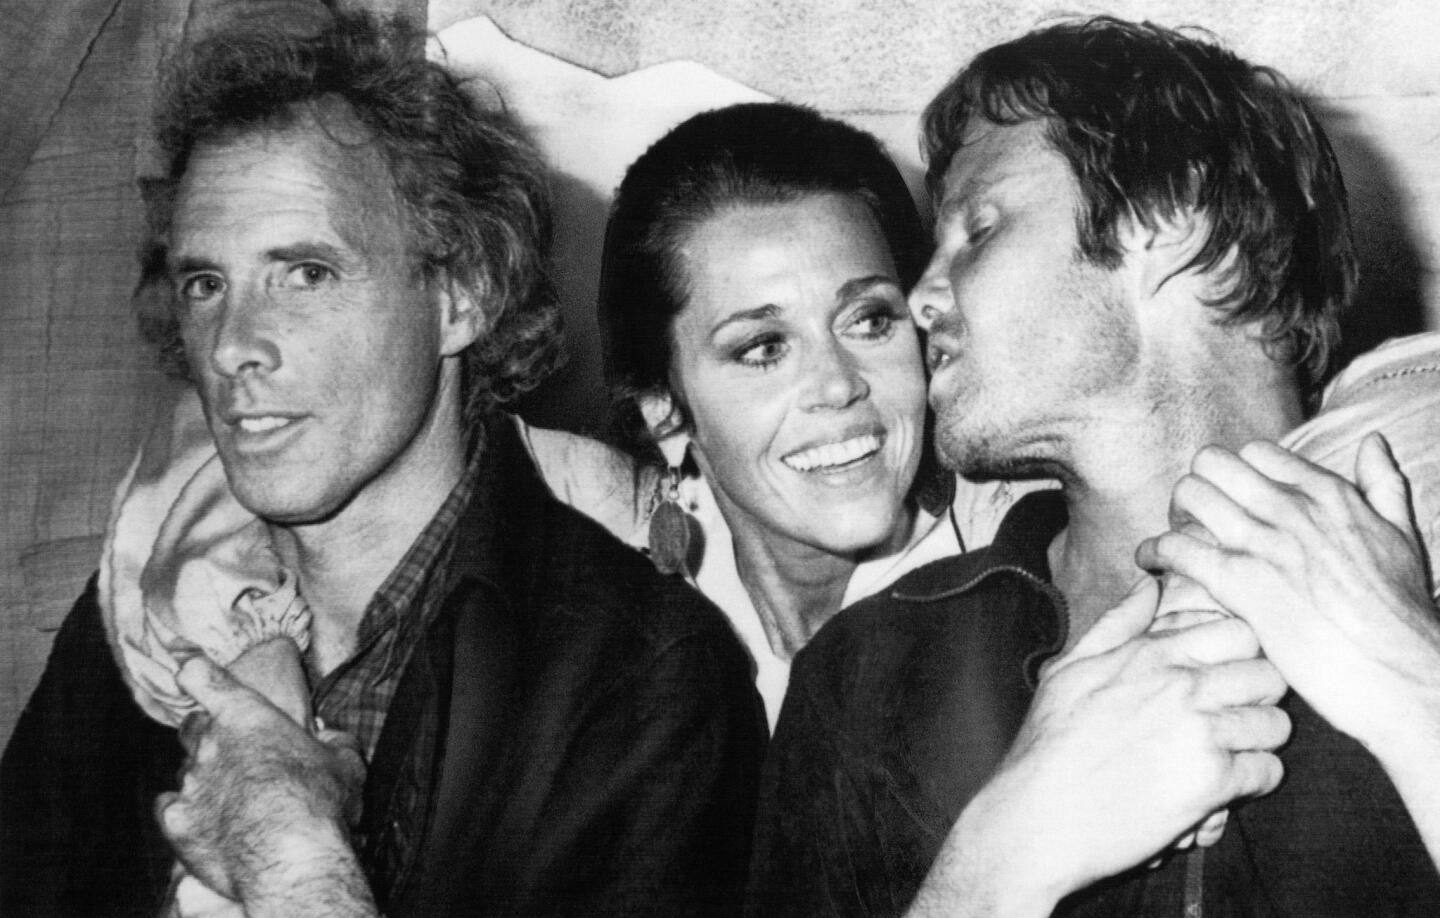 Jon Voight, right, turns to kiss Jane Fonda on May 26, 1978, as they pose with Bruce Dern, left, before the screening of "Coming Home" at the Cannes Film Festival. More: Sign up for our Classic Hollywood newsletter.